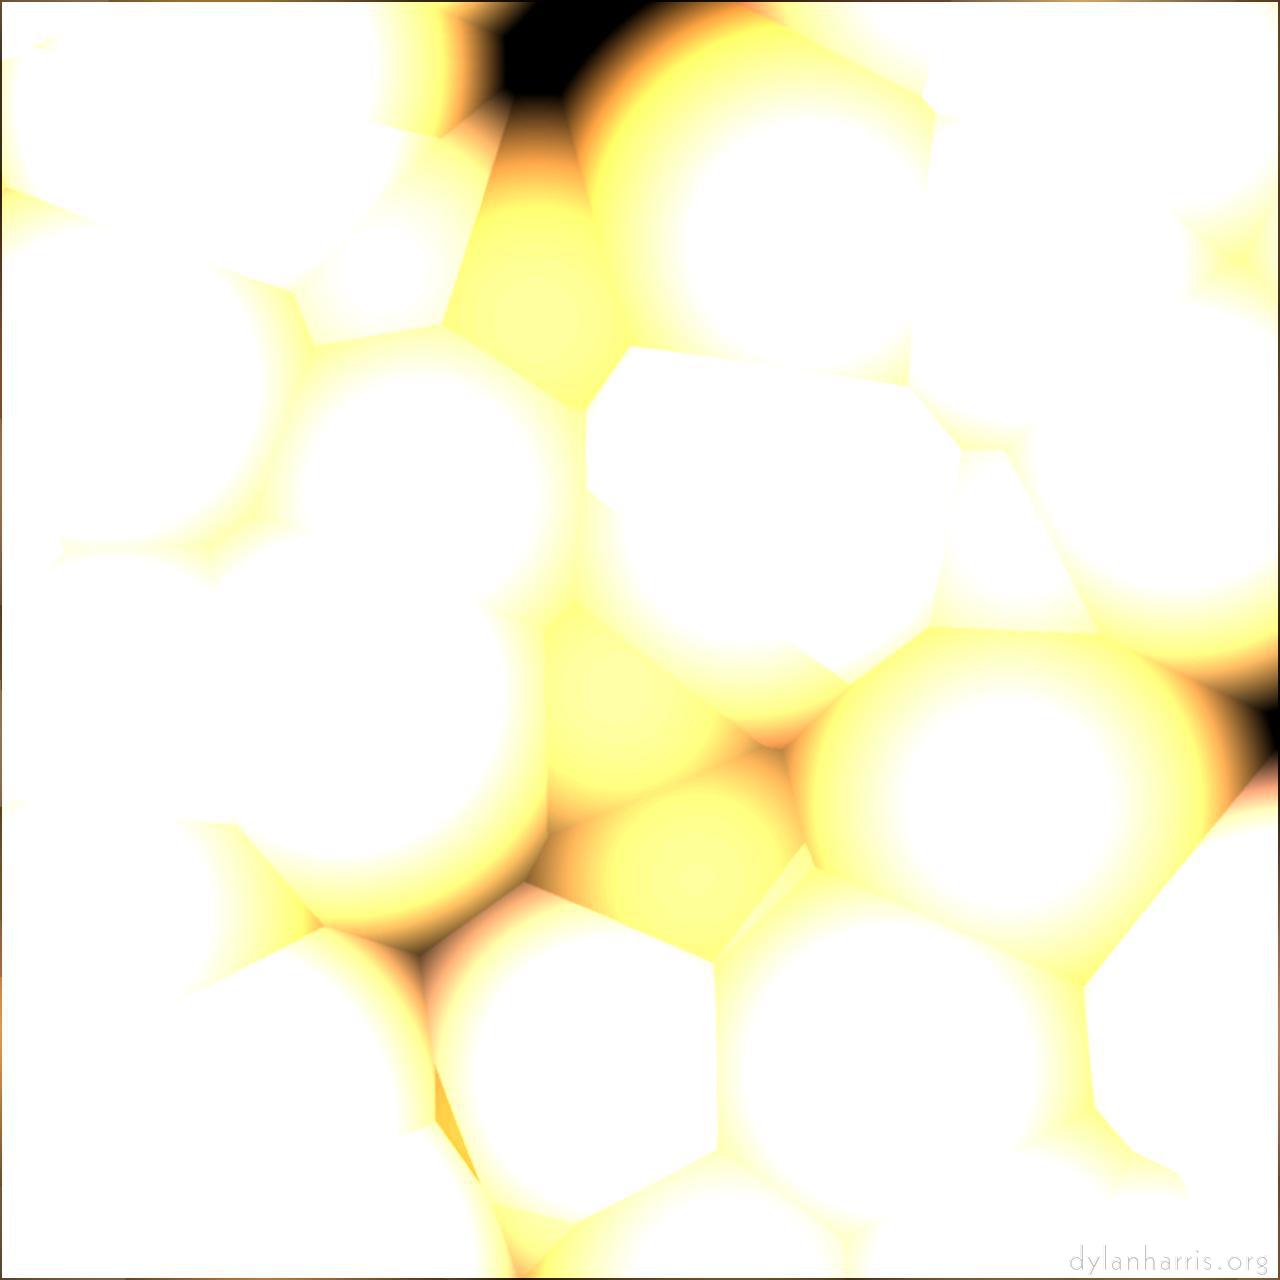 image: patterns 2 :: boiling cellular texture 2